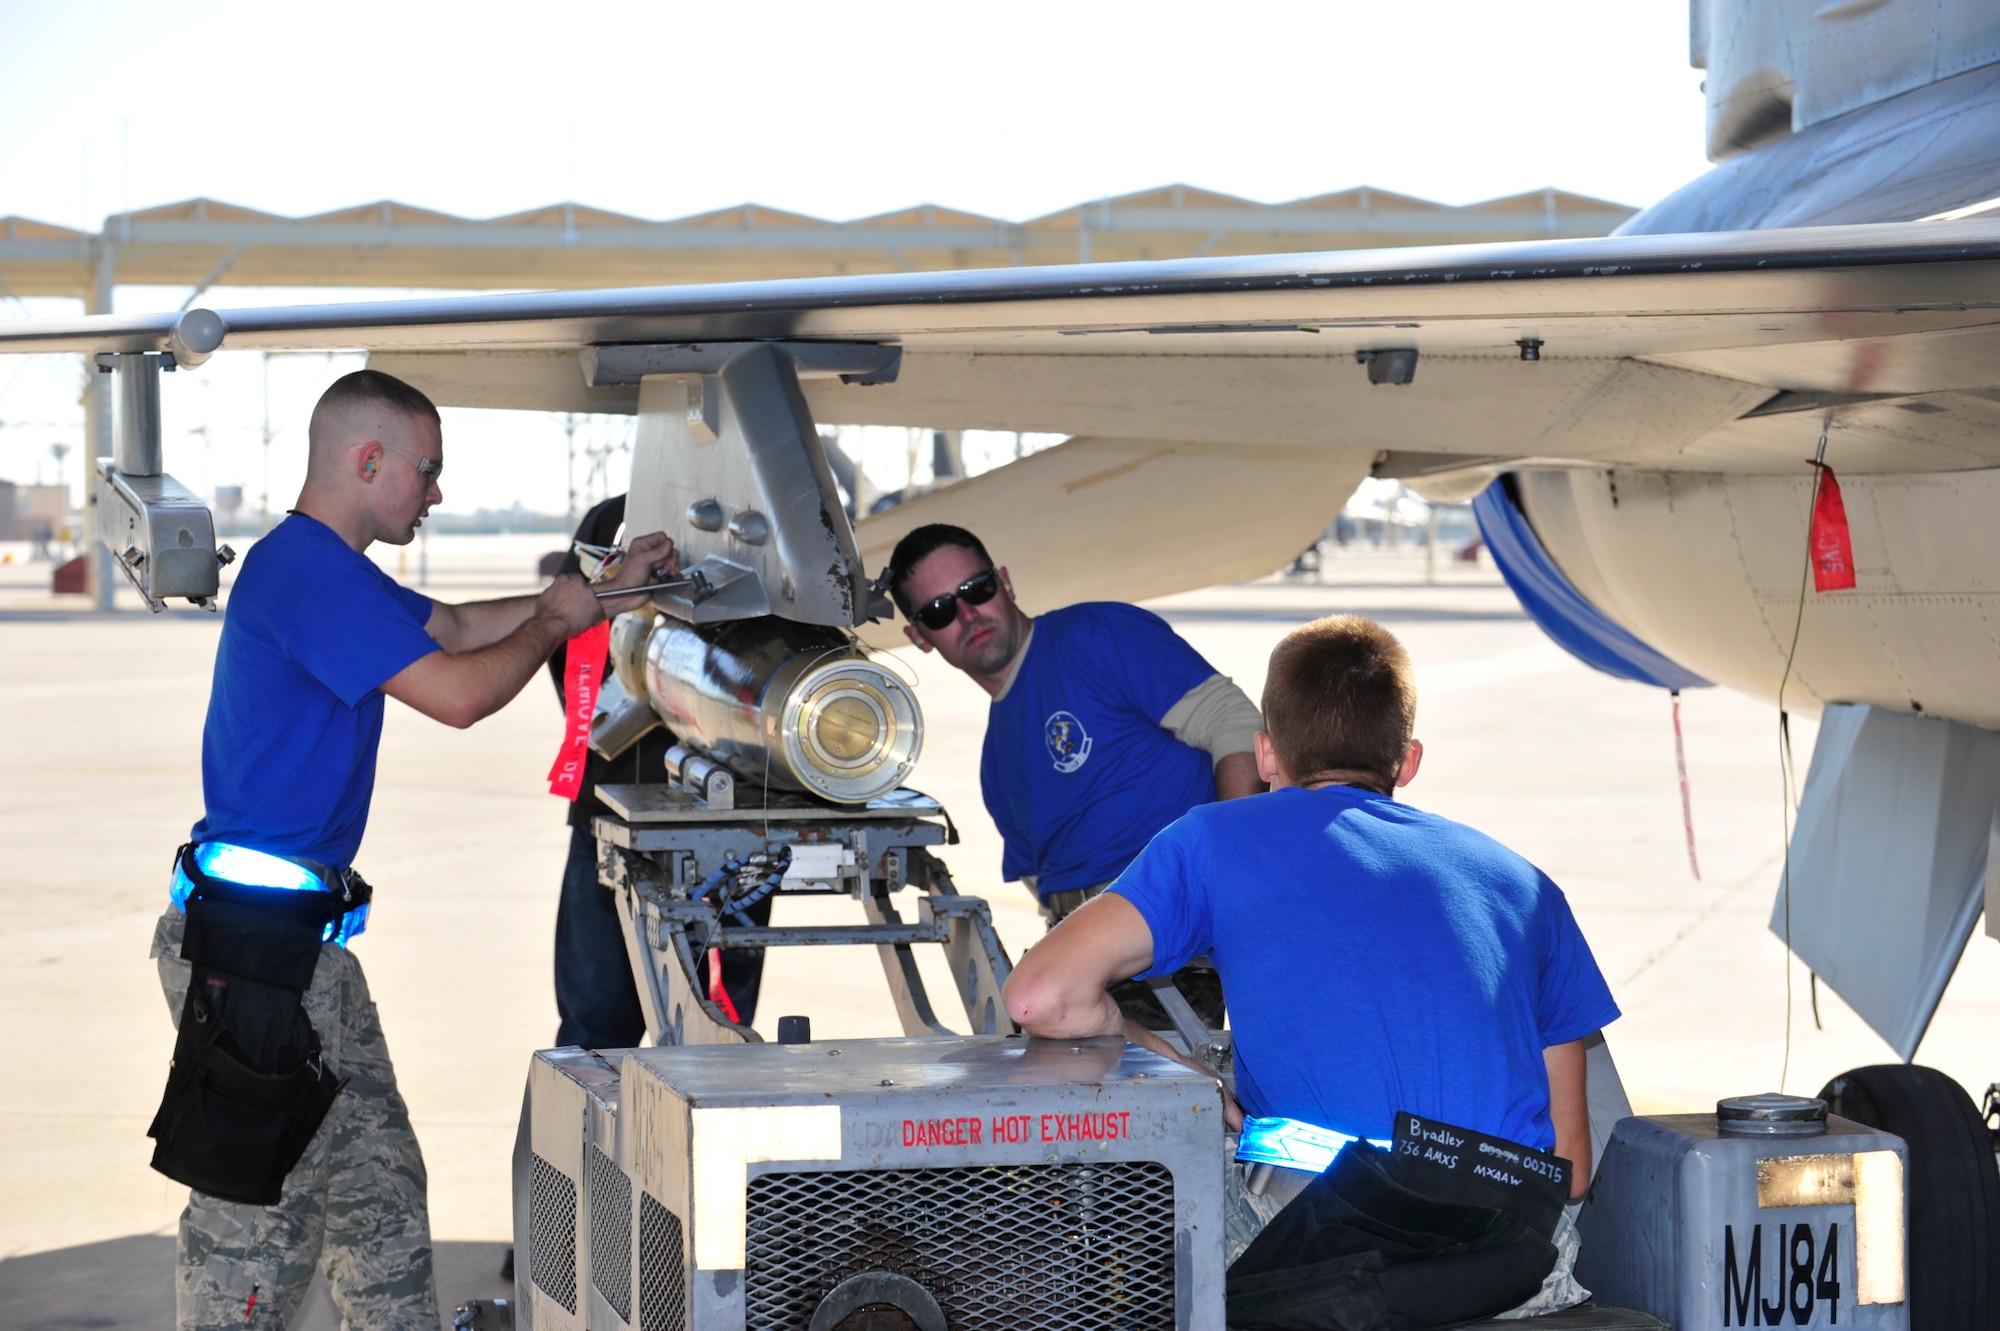 309th Aircraft Maintenance Unit weapons load crew members, prepare to load an F-16 Fighting Falcon during the 4th quarter weapon's loading competition Dec. 18 at Luke Air Force Base, Ariz. This quarter featured the first time the F-35 Lightning ll was used in the competition against the F-16 at Luke. Three man crews from the 61st AMU, 309th AMU, 310th AMU, and the 425th AMU went head to head to earn this quarters win. (U.S. Air Force photo by Senior Airman Grace Lee)